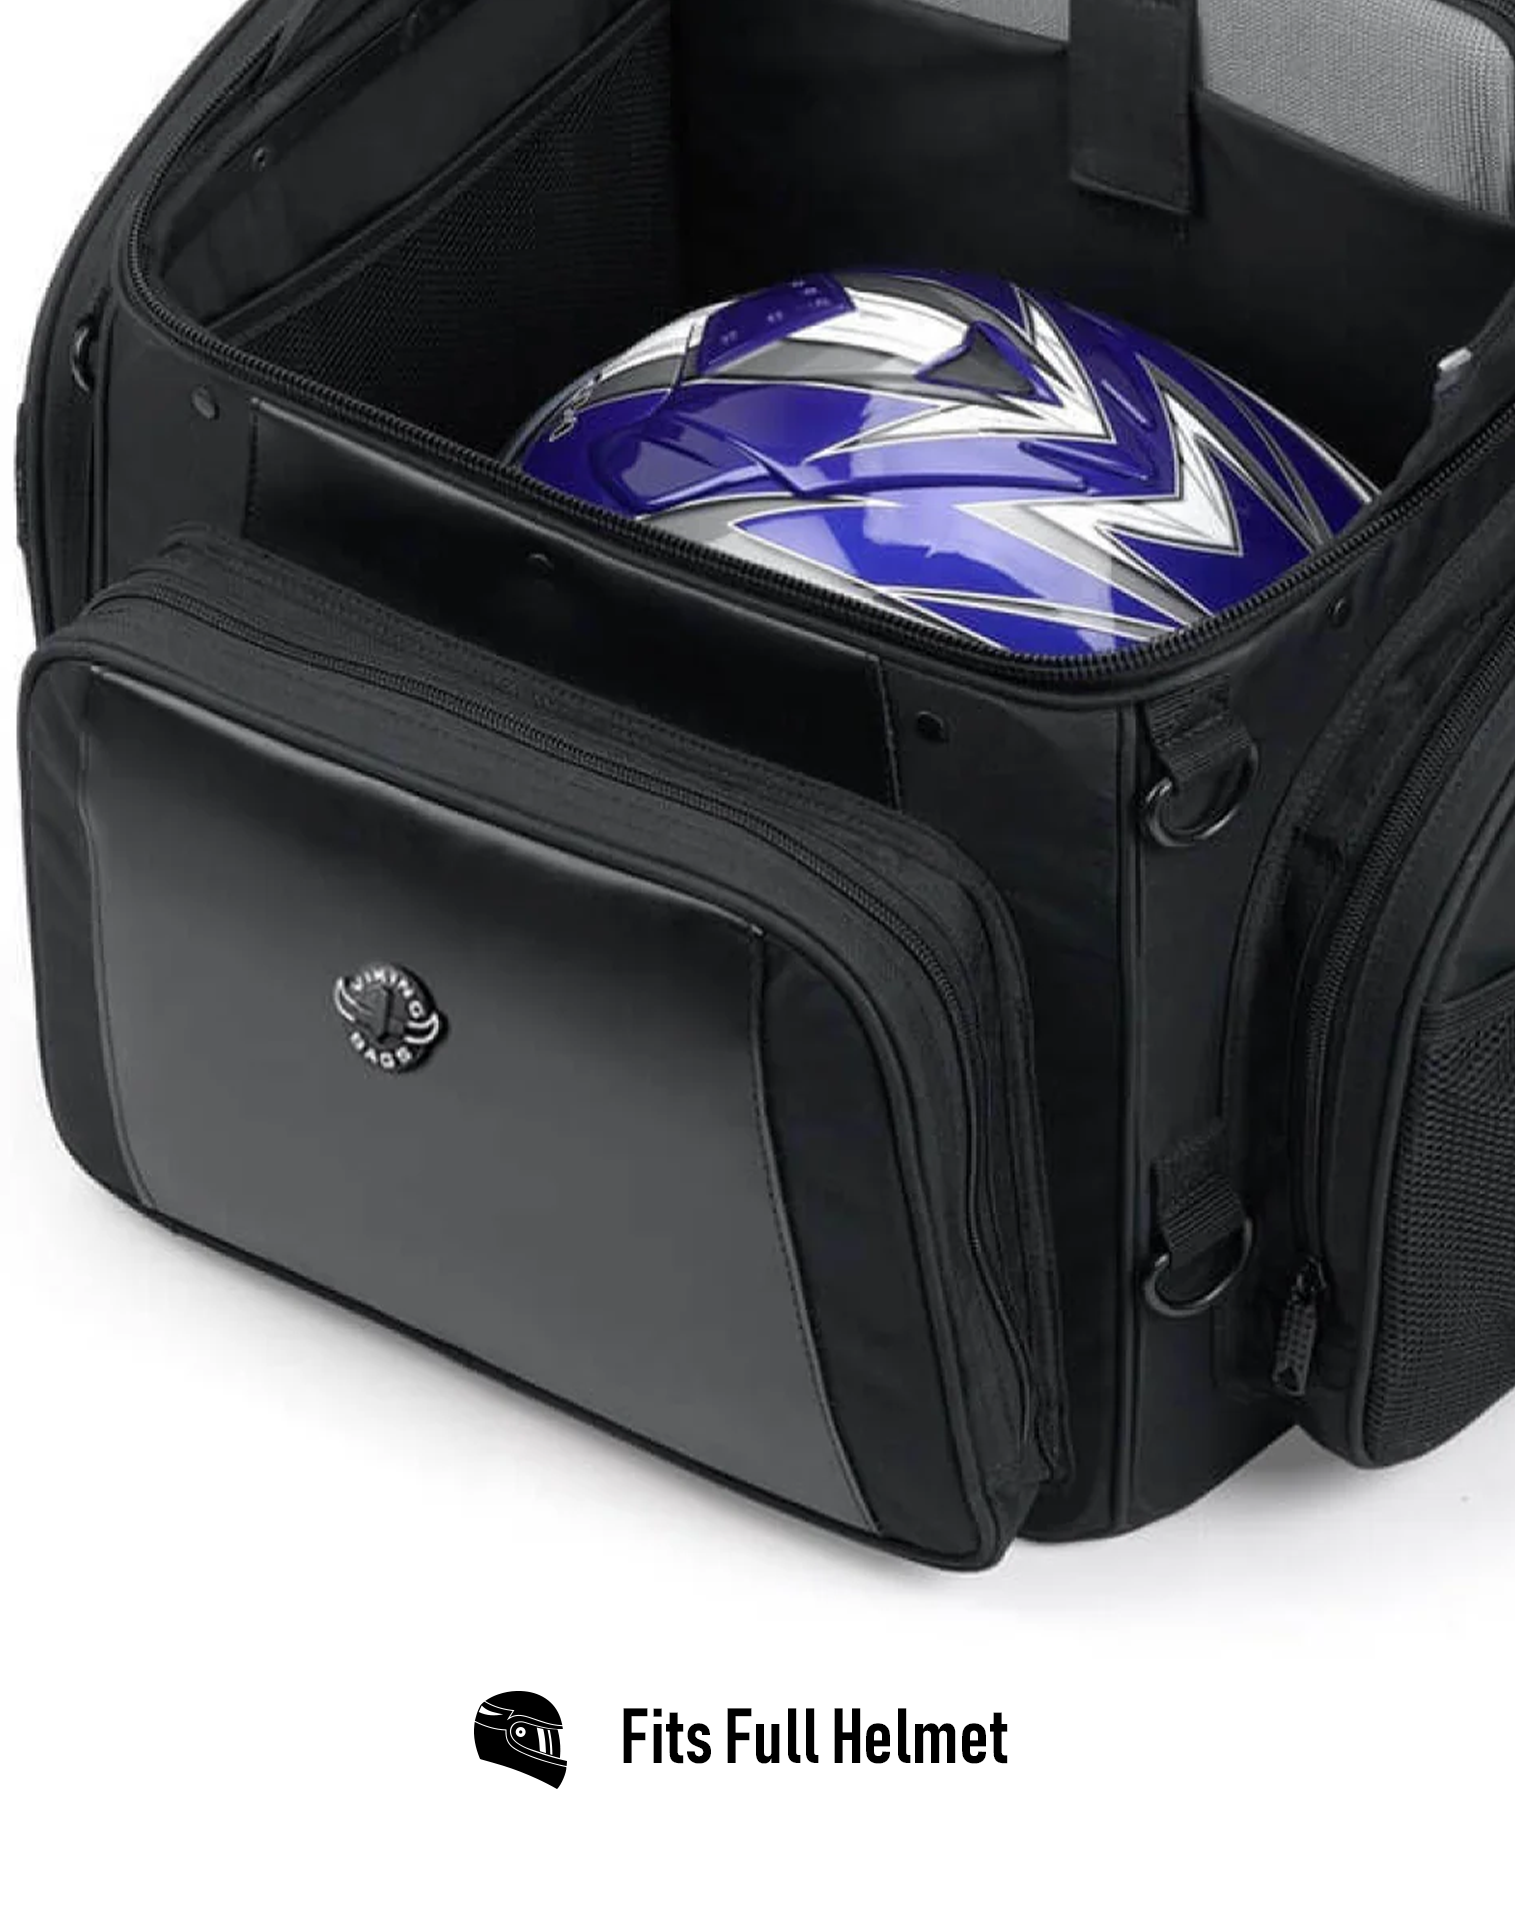 52L - Galleon XL Motorcycle Tail Bag